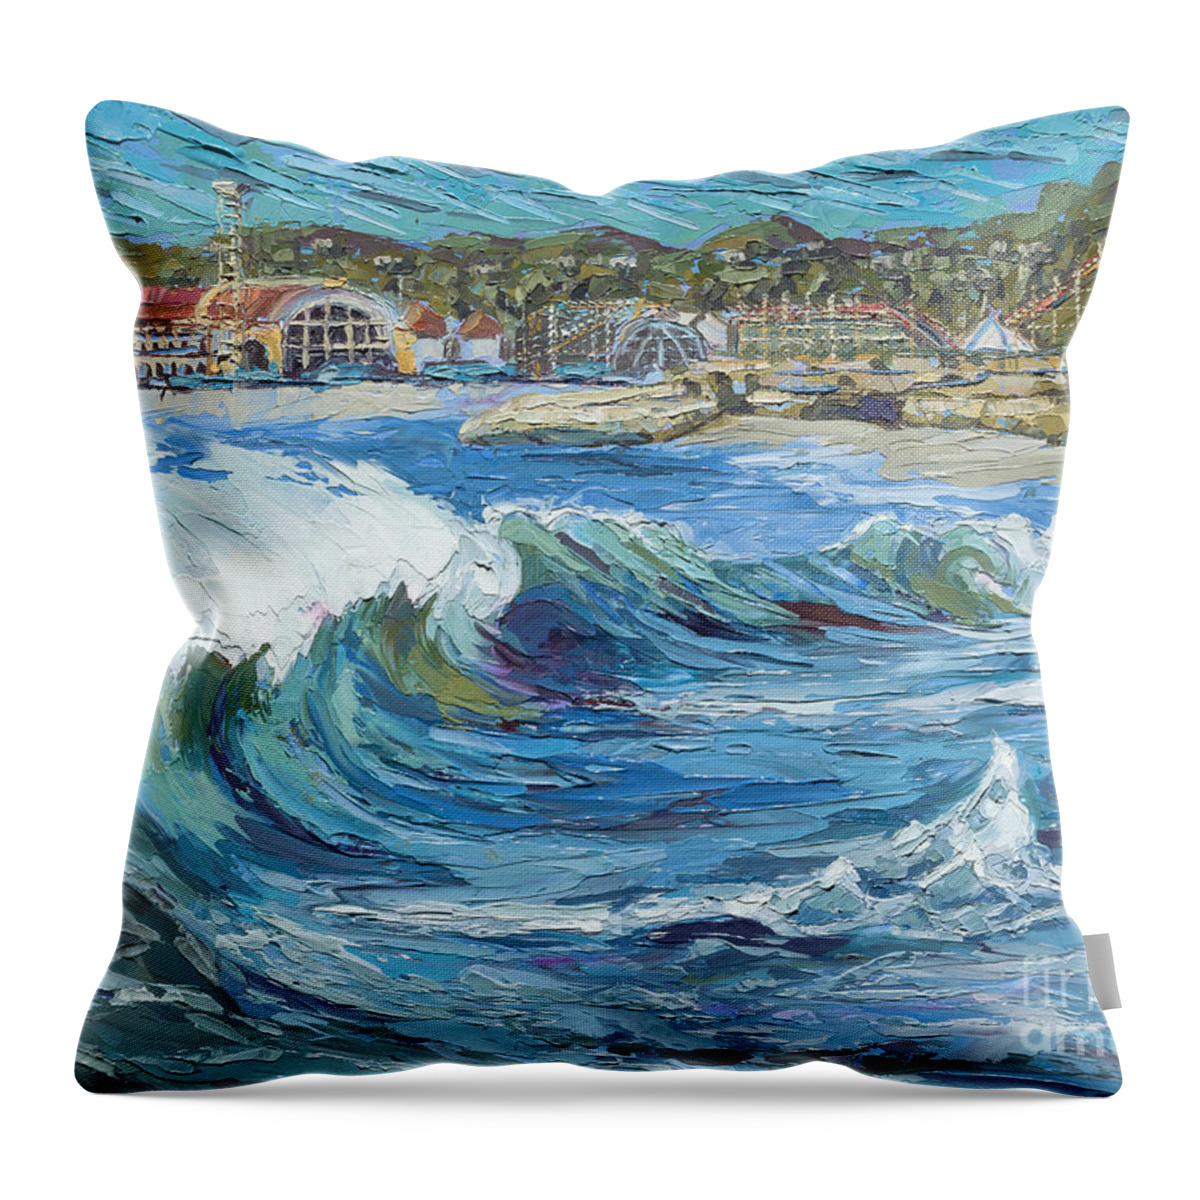 Ocean Throw Pillow featuring the painting Devdutt's Wave by PJ Kirk